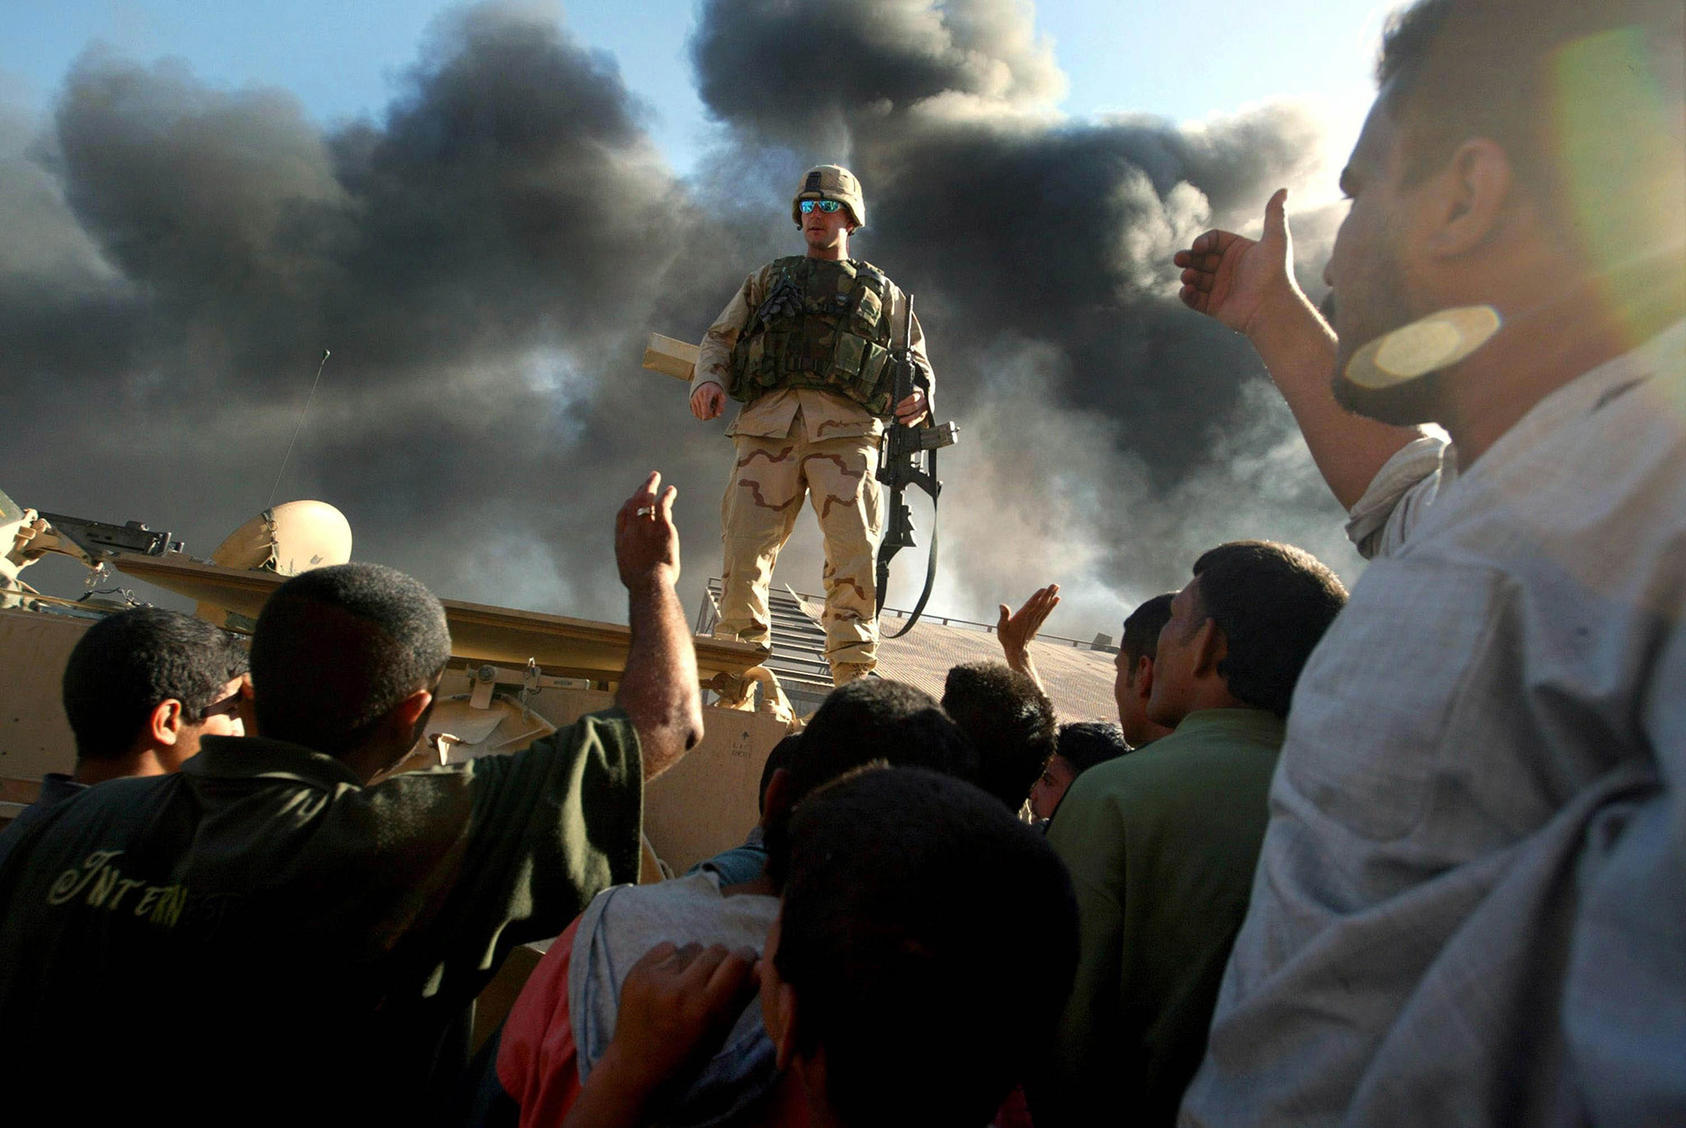 A U.S. soldier confronts angry Iraqi civilians in May 2003 following an explosion in Baghdad. U.S. forces faced severe challenges in trying to govern Iraq after overthrowing Saddam Hussein. (Richard Perry/The New York Times)